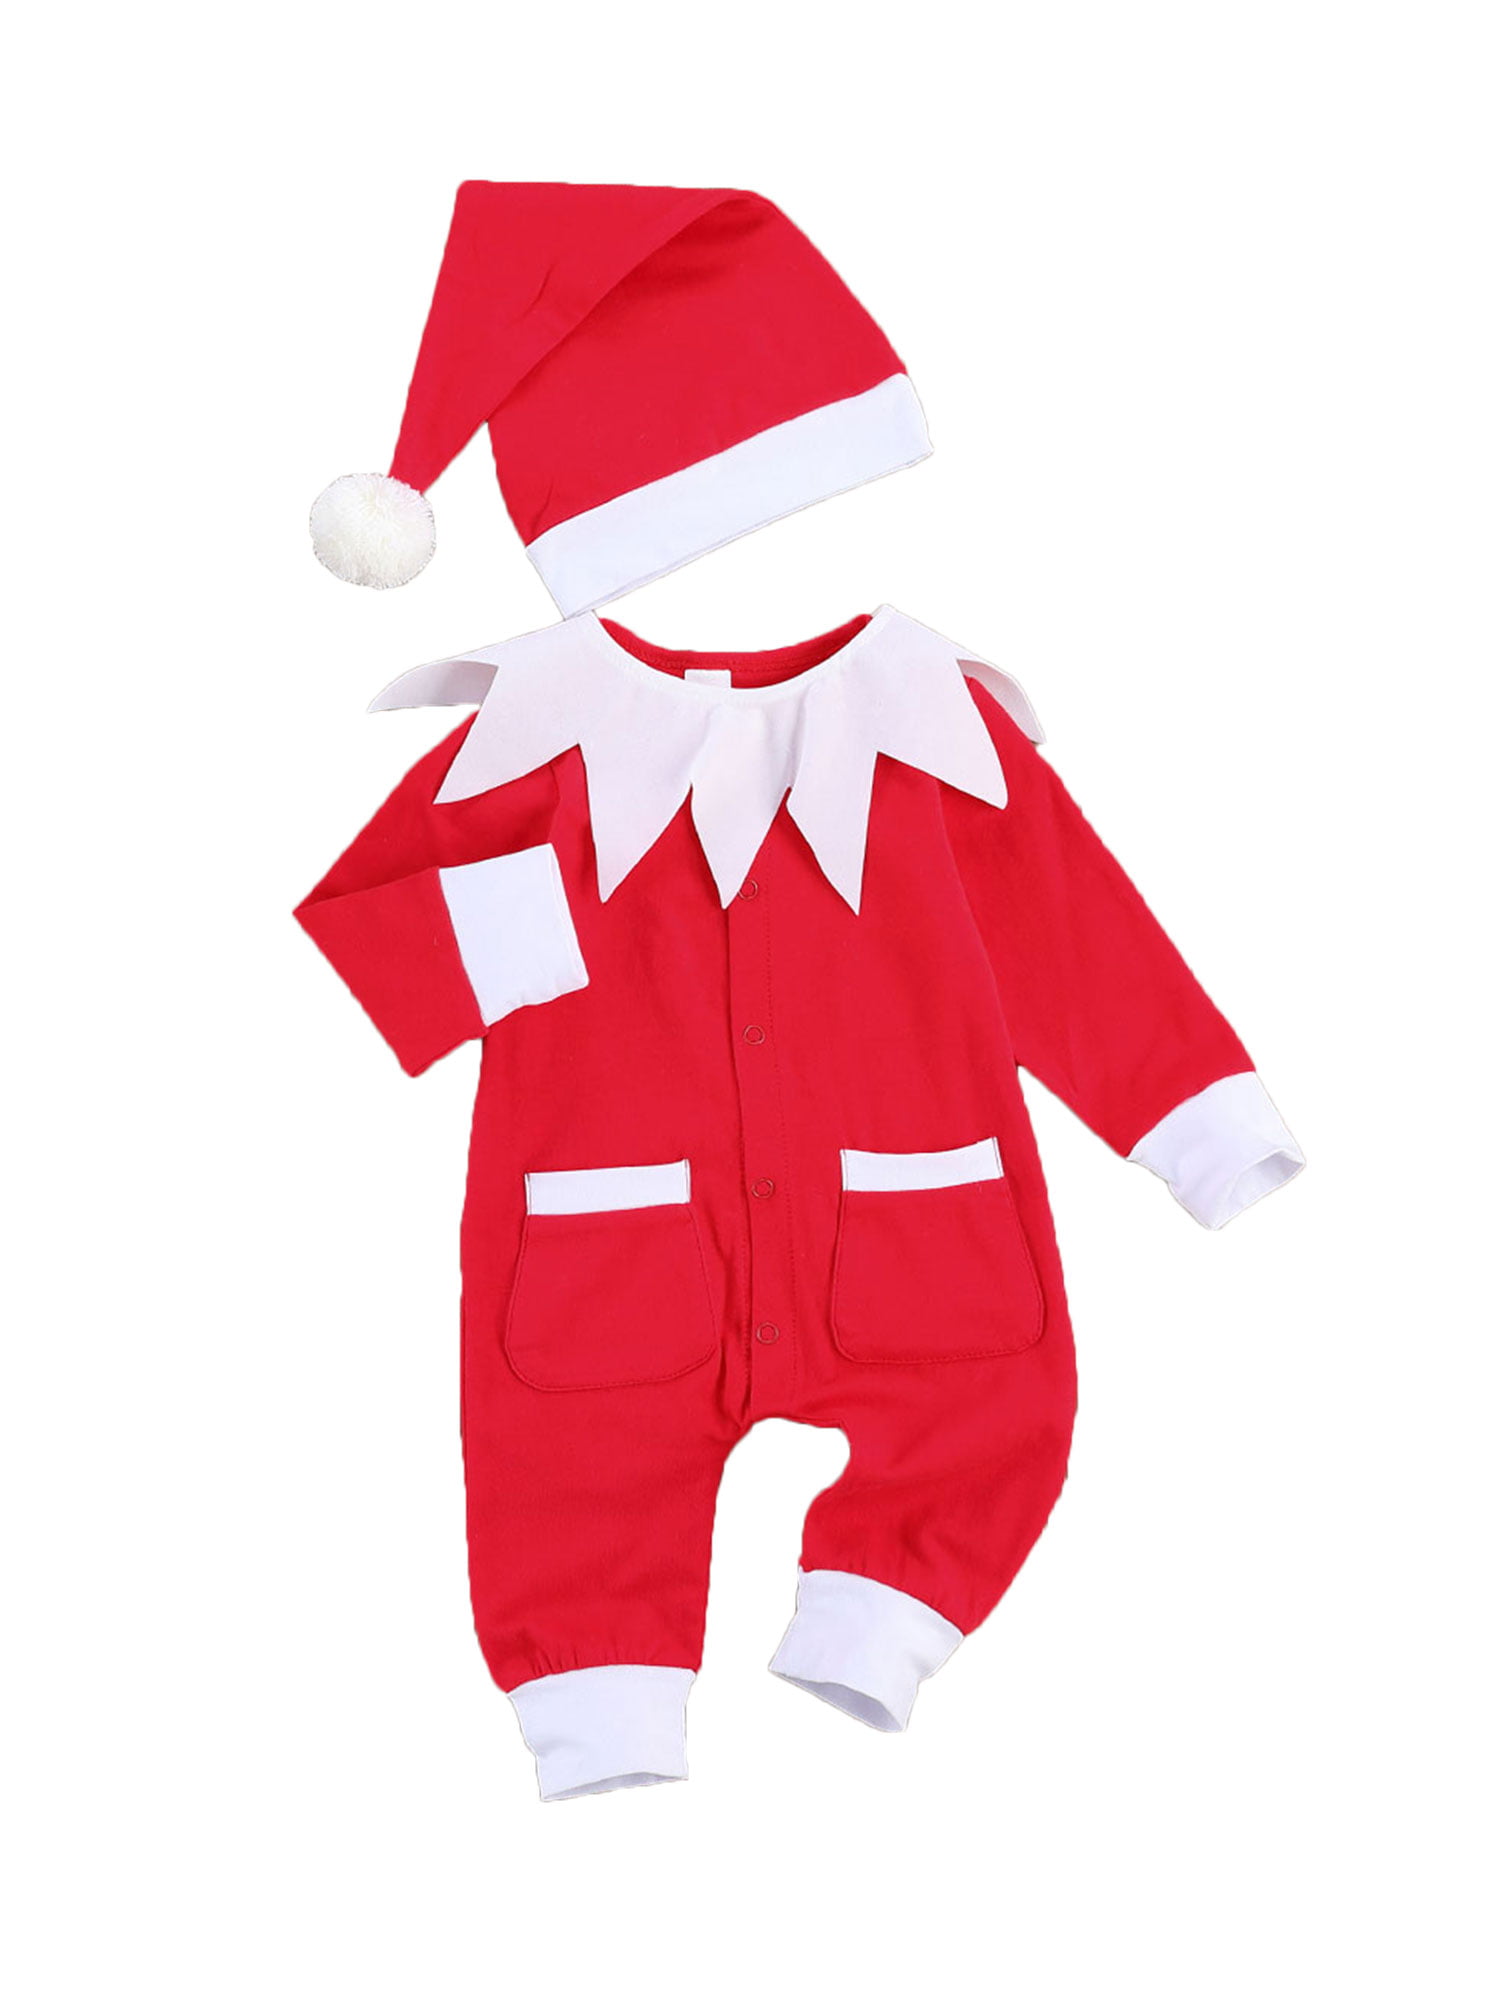 Details about   3Pcs Newborn Baby Boy Girl Christmas • Claus Costume Romper Outfits Clothes 